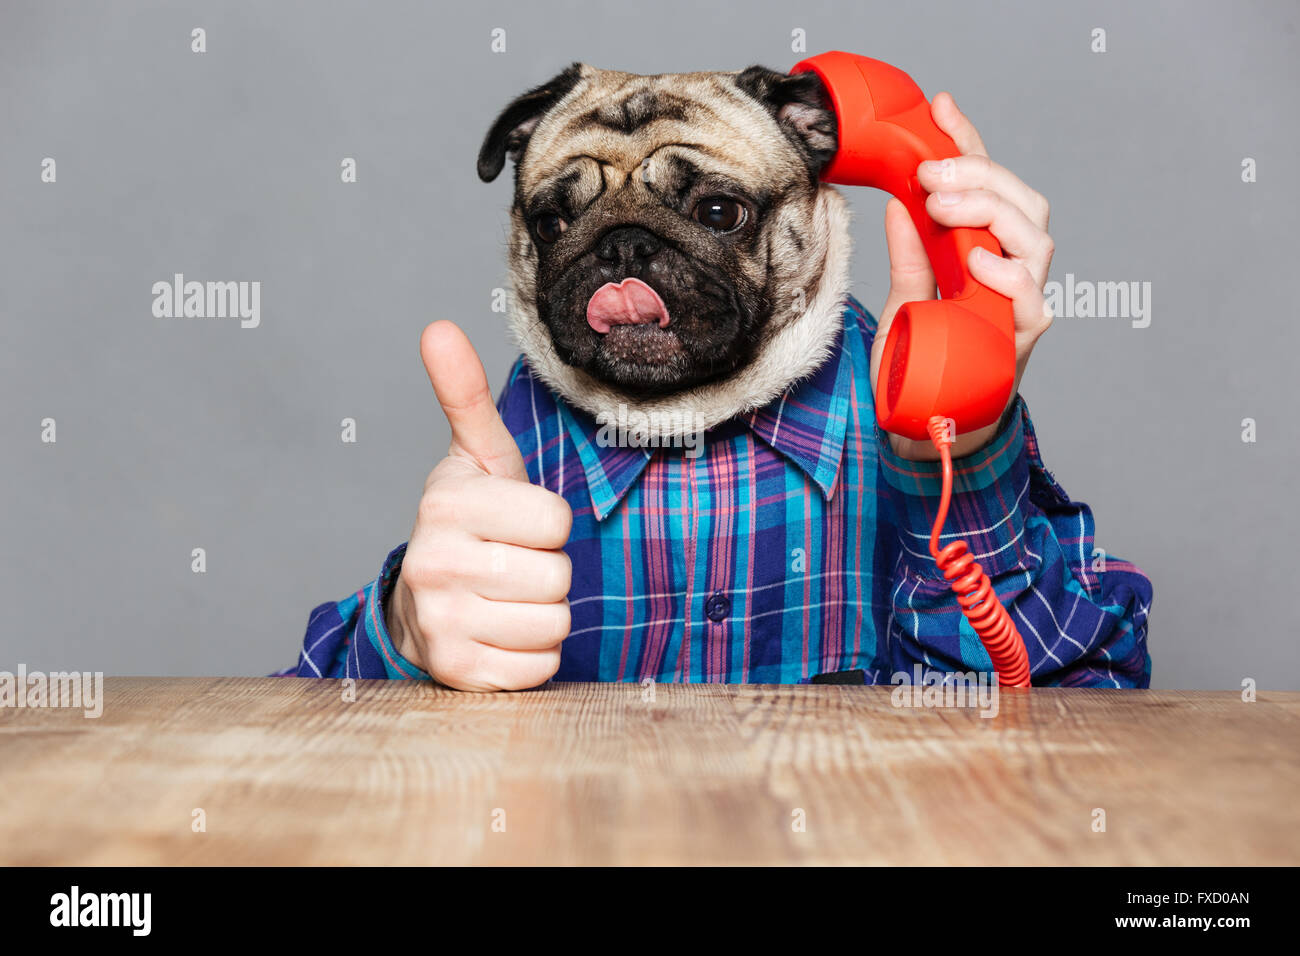 Funny pug dog with man hands in checkered shirt talking on telephone and showing thumbs up over grey background Stock Photo